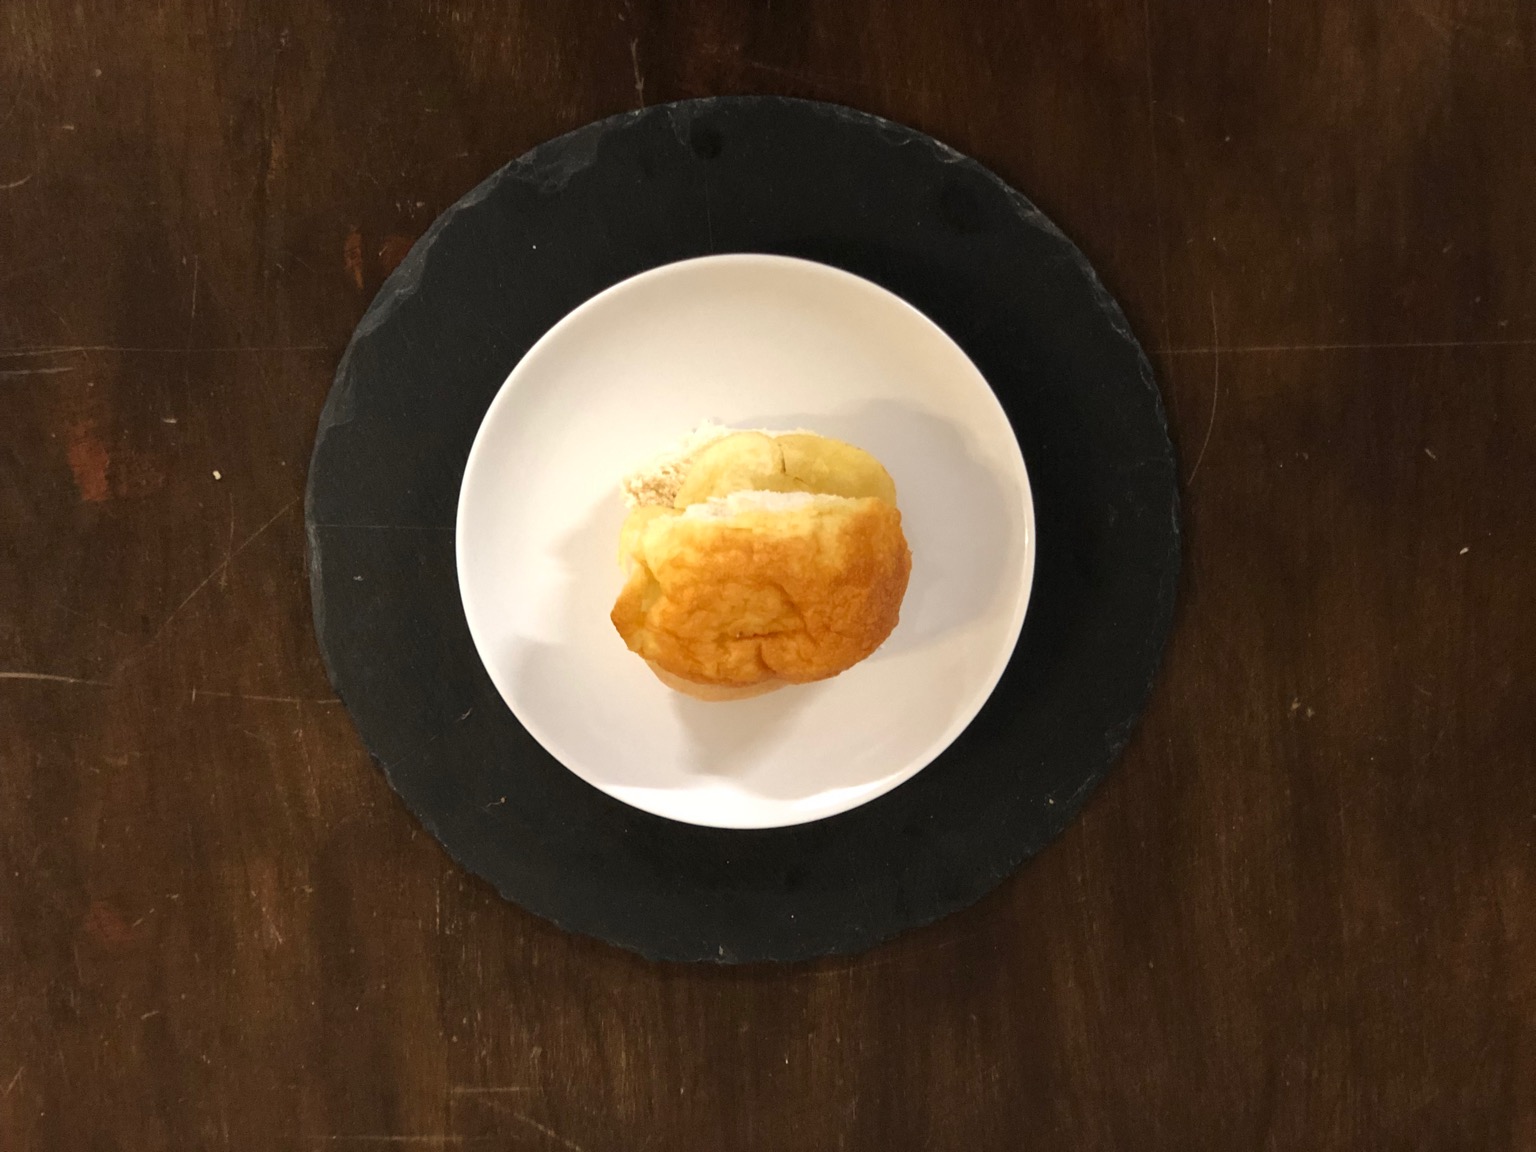 Overhead view of cheese-topped crisp roll